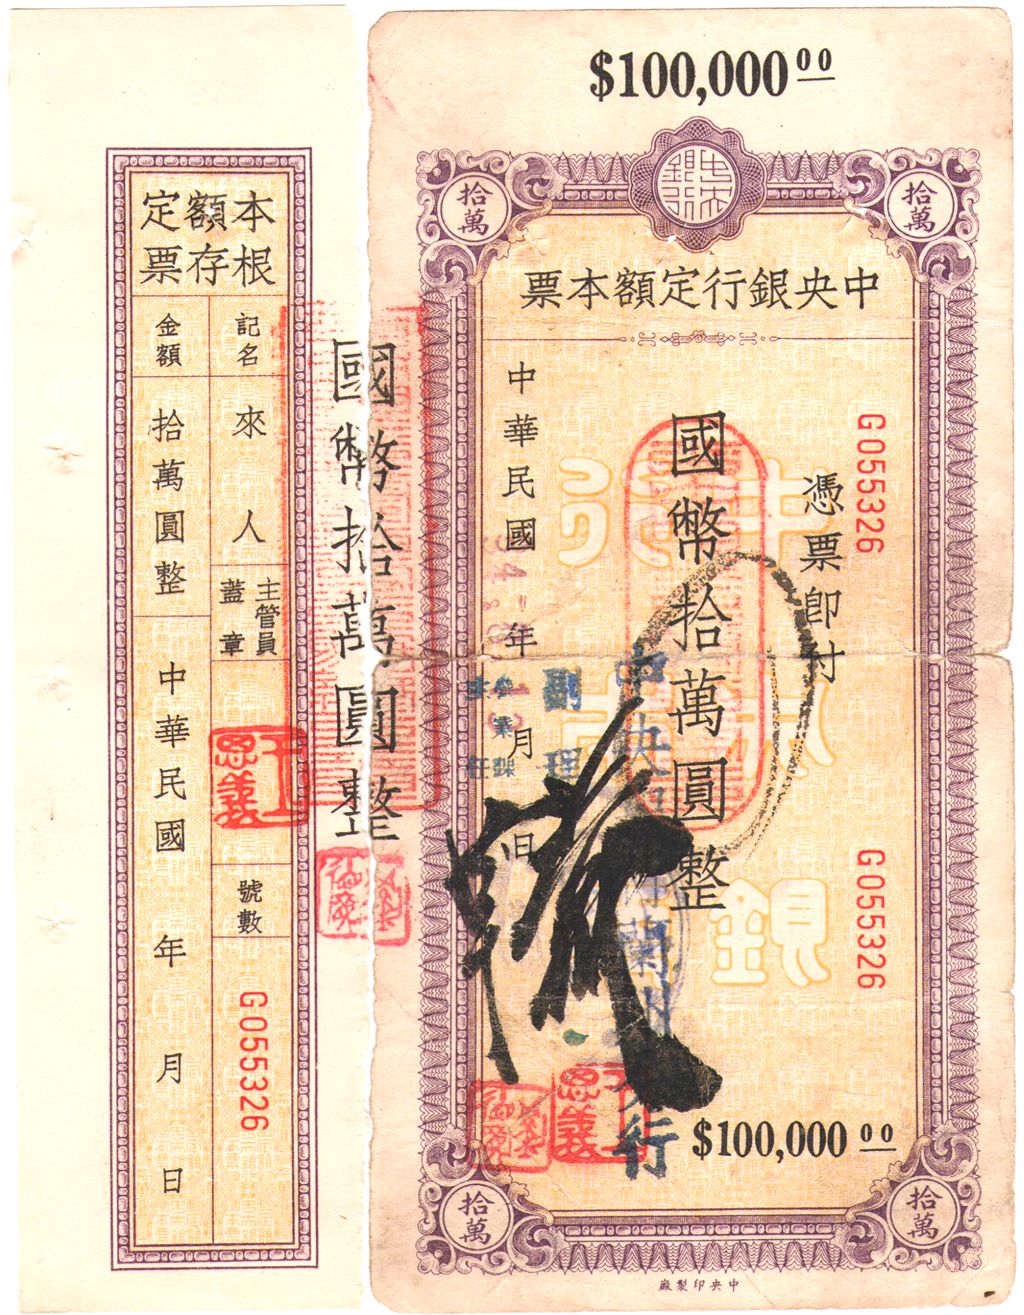 D3110, Central Bank of China, Cash Promissory Note 40,000 Dollars, 1945